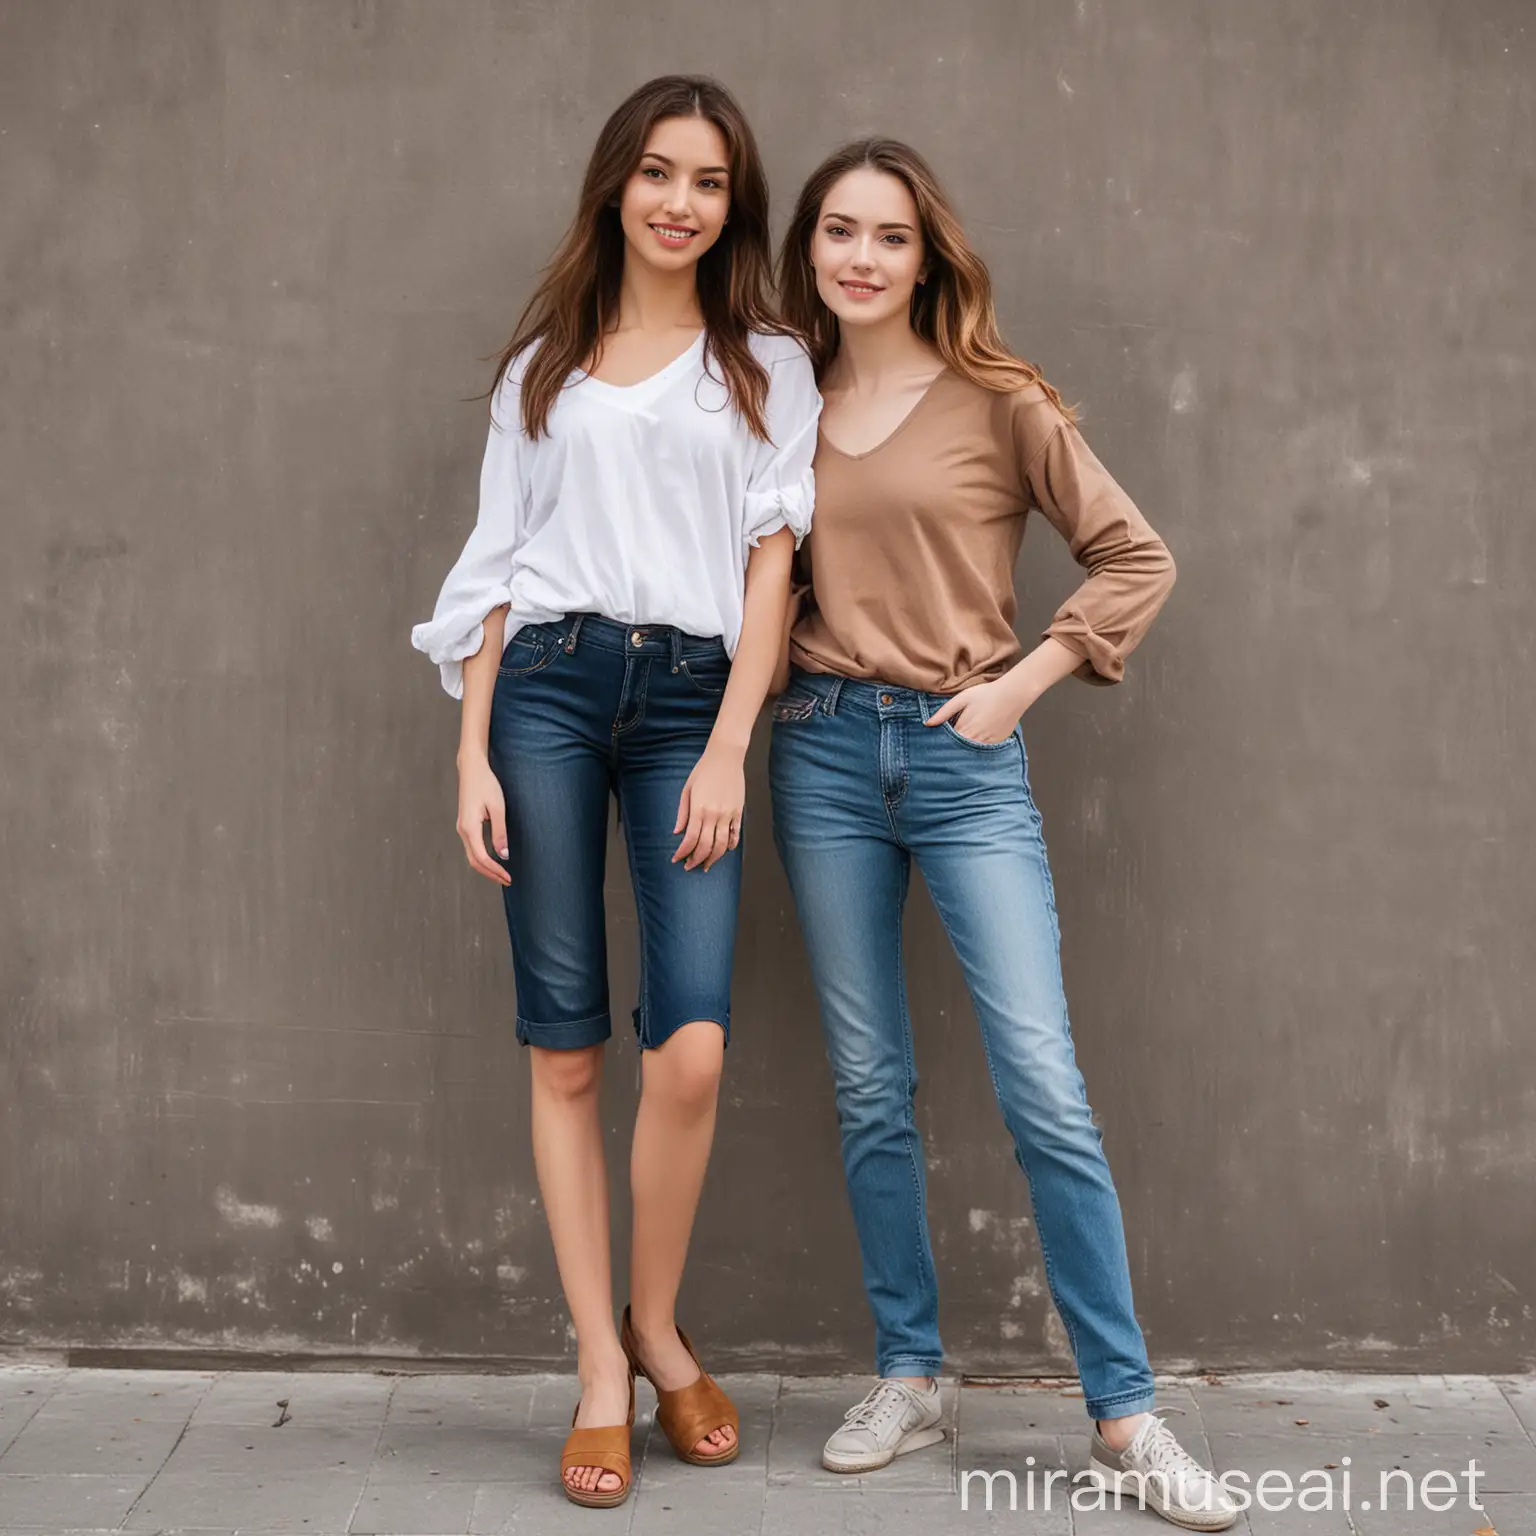 Two Stylish Women Standing Together Height Difference Fashion Pose